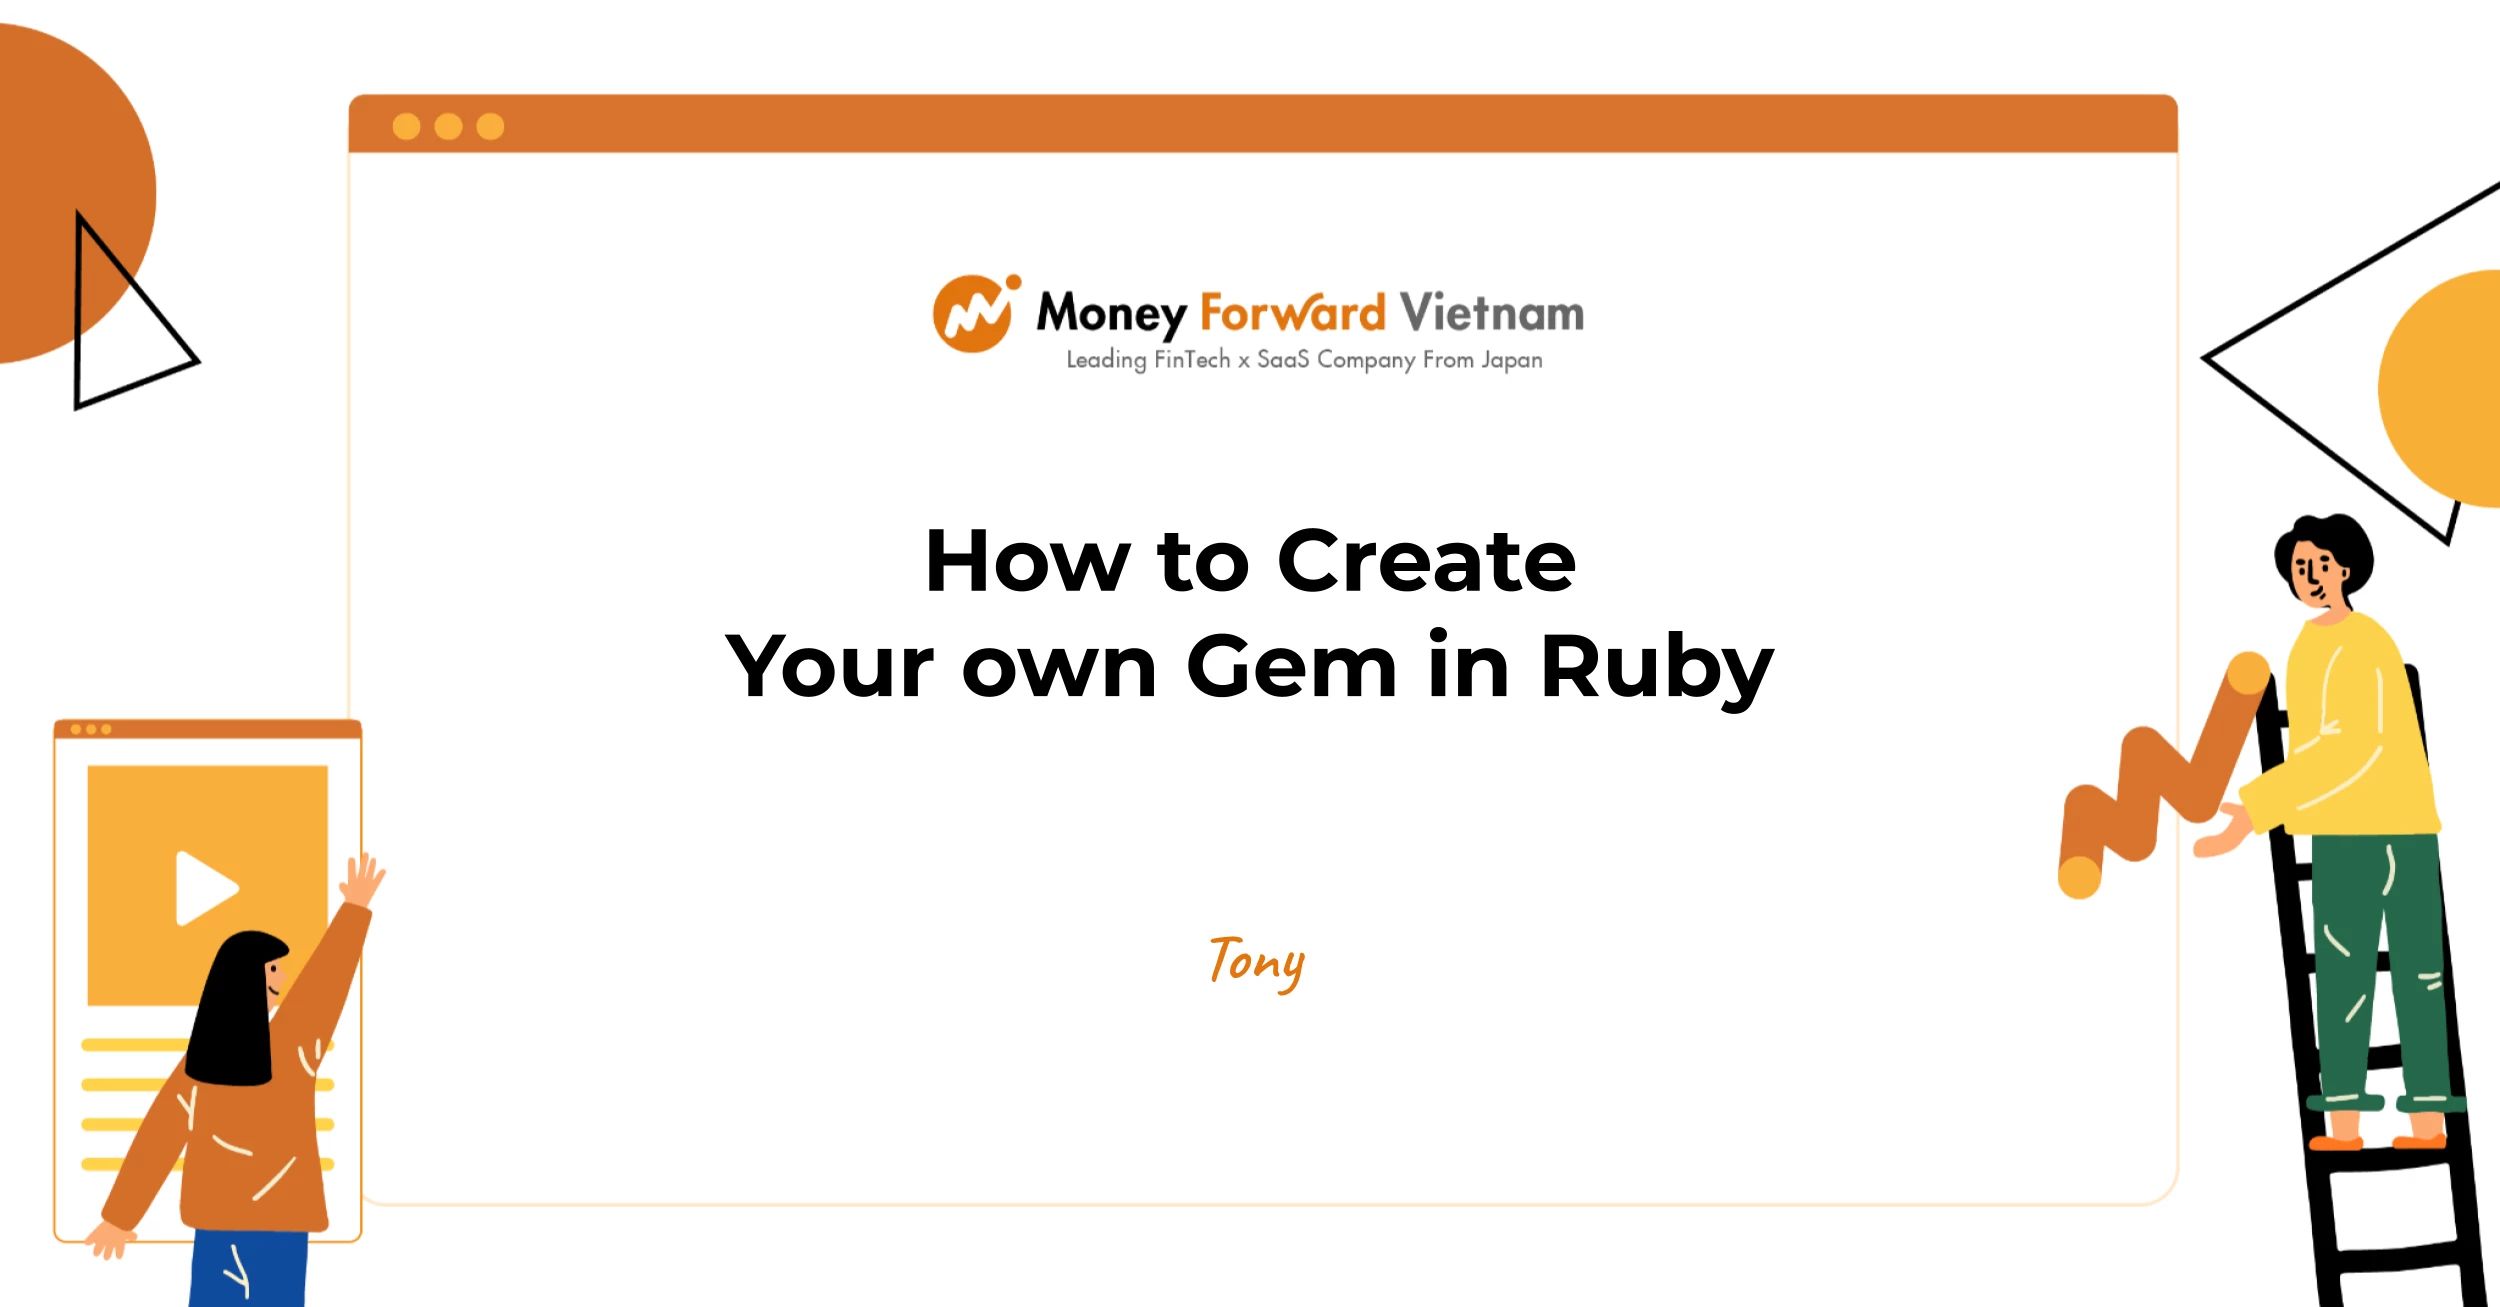 How to create your own gem in Ruby